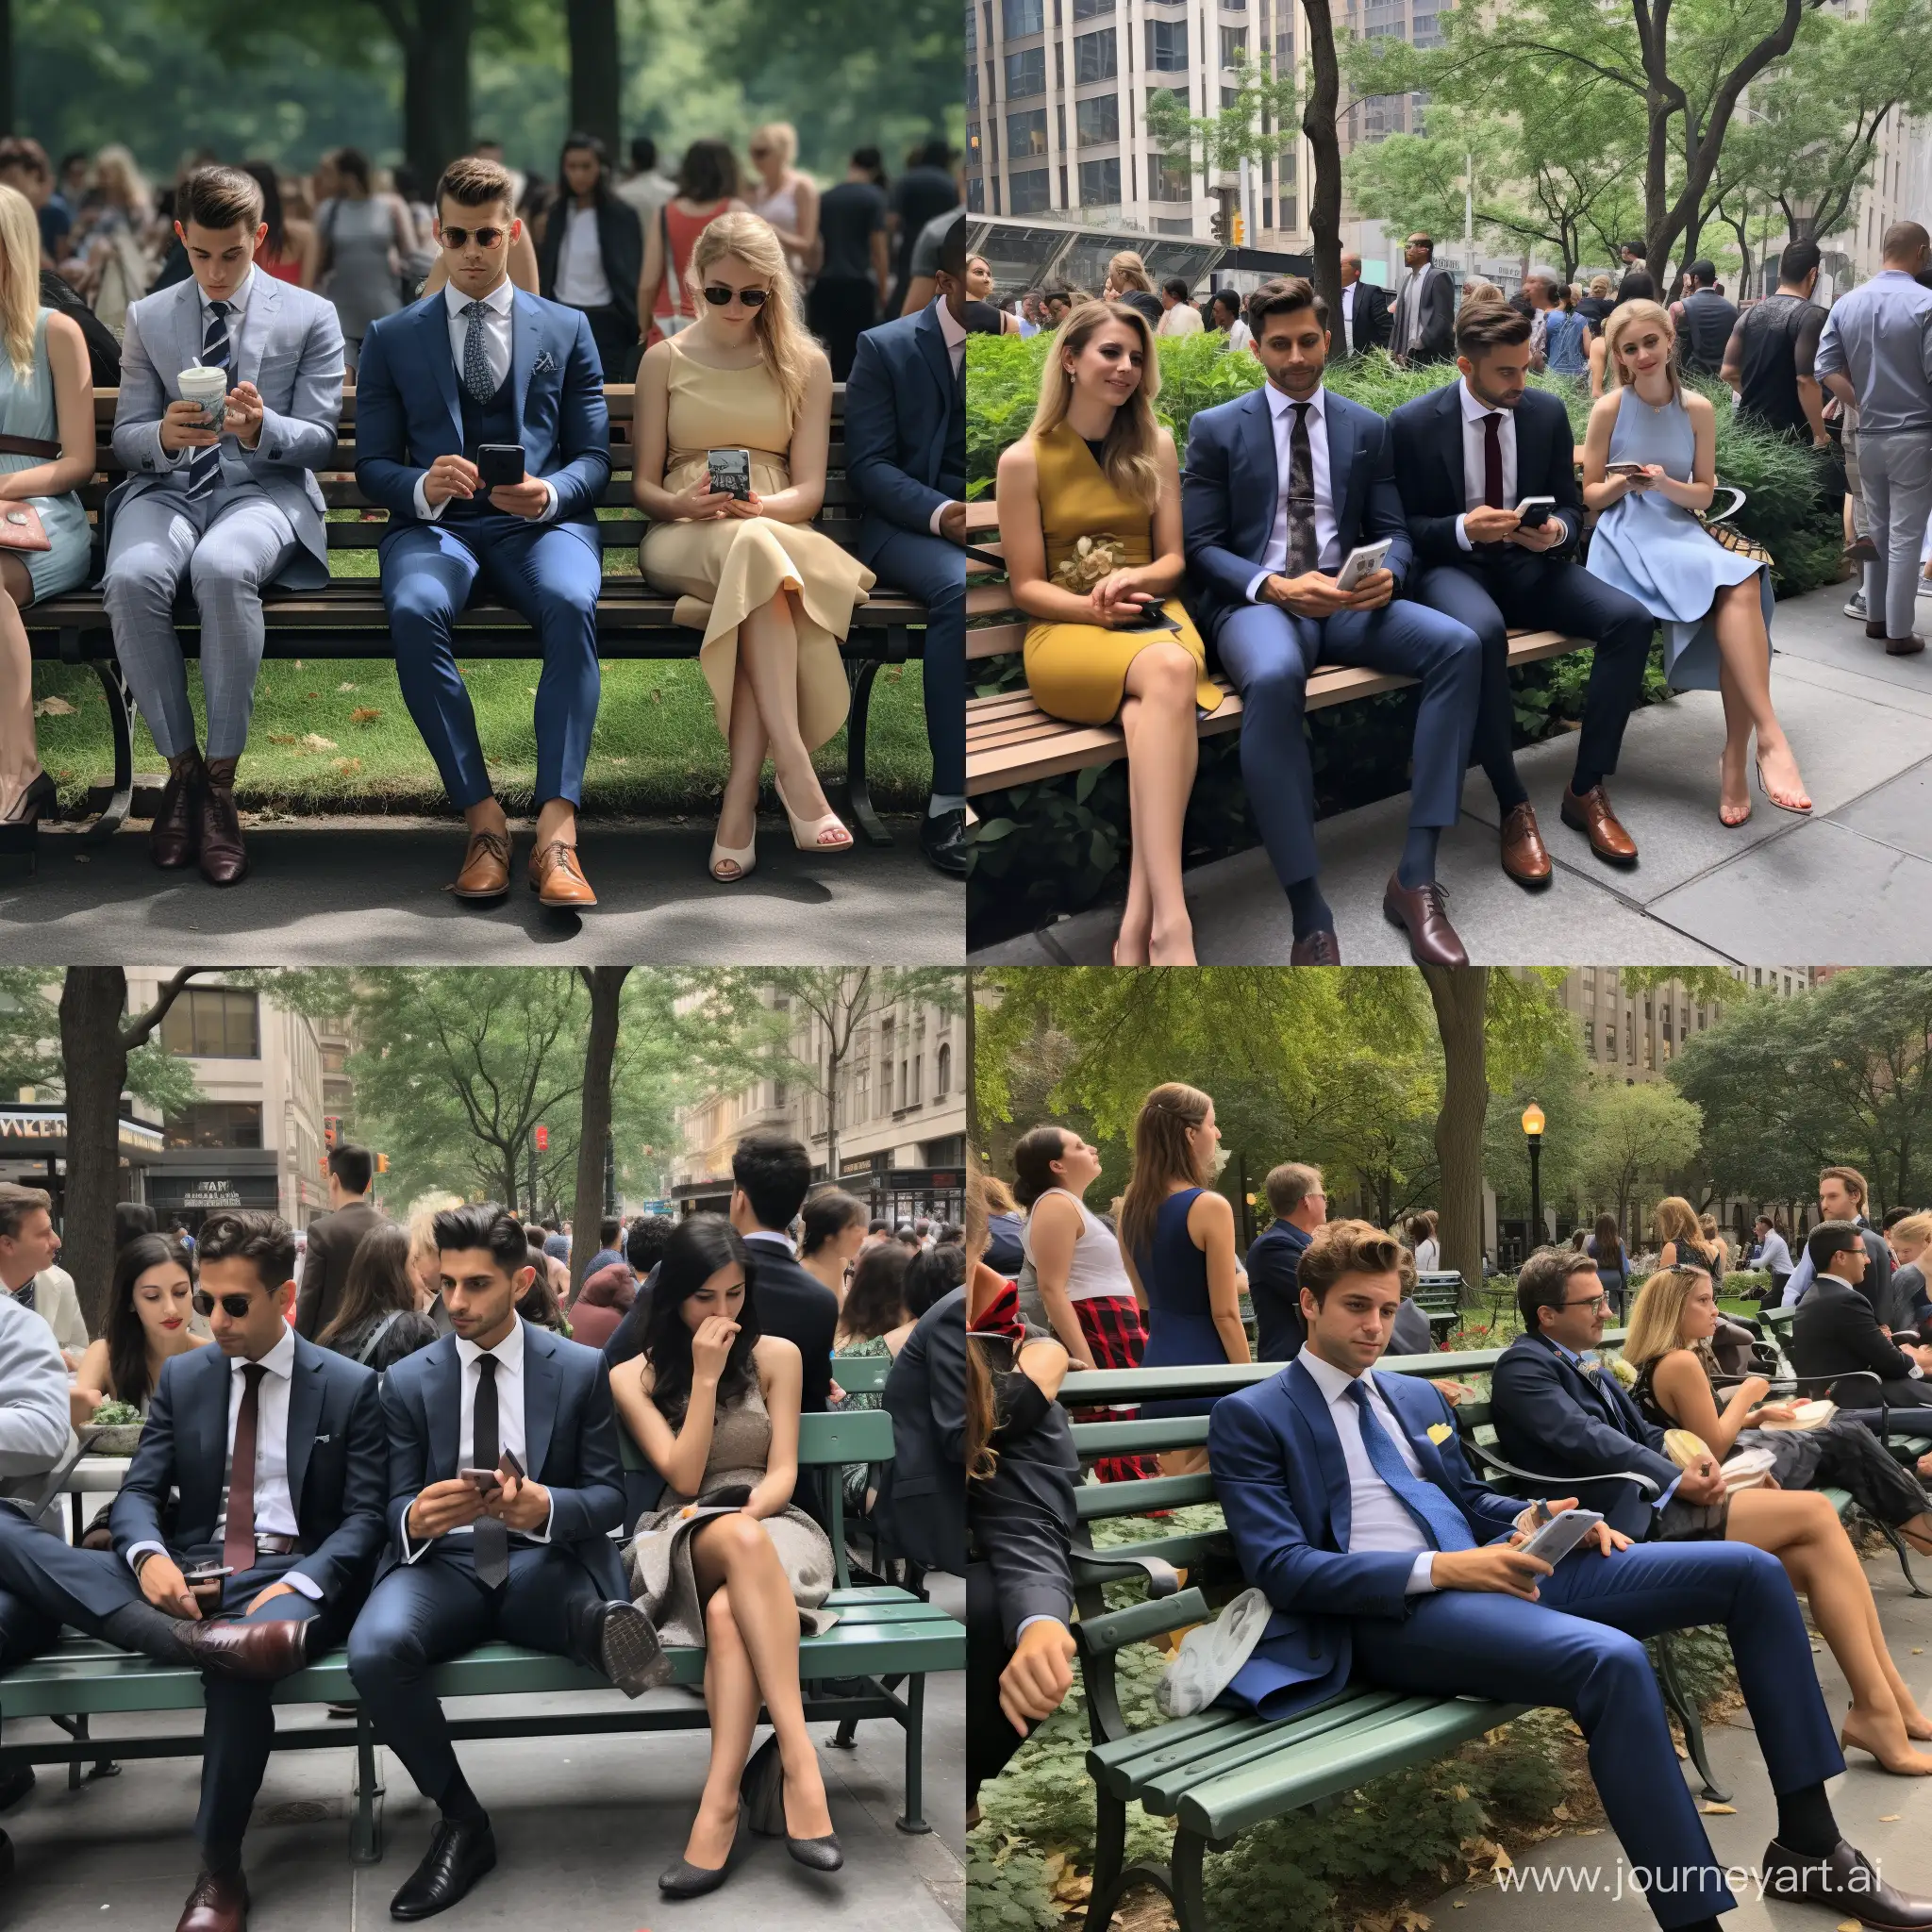 phone photo of a man sitting on a bench with his family at a wedding in New York posted to reddit in 2019